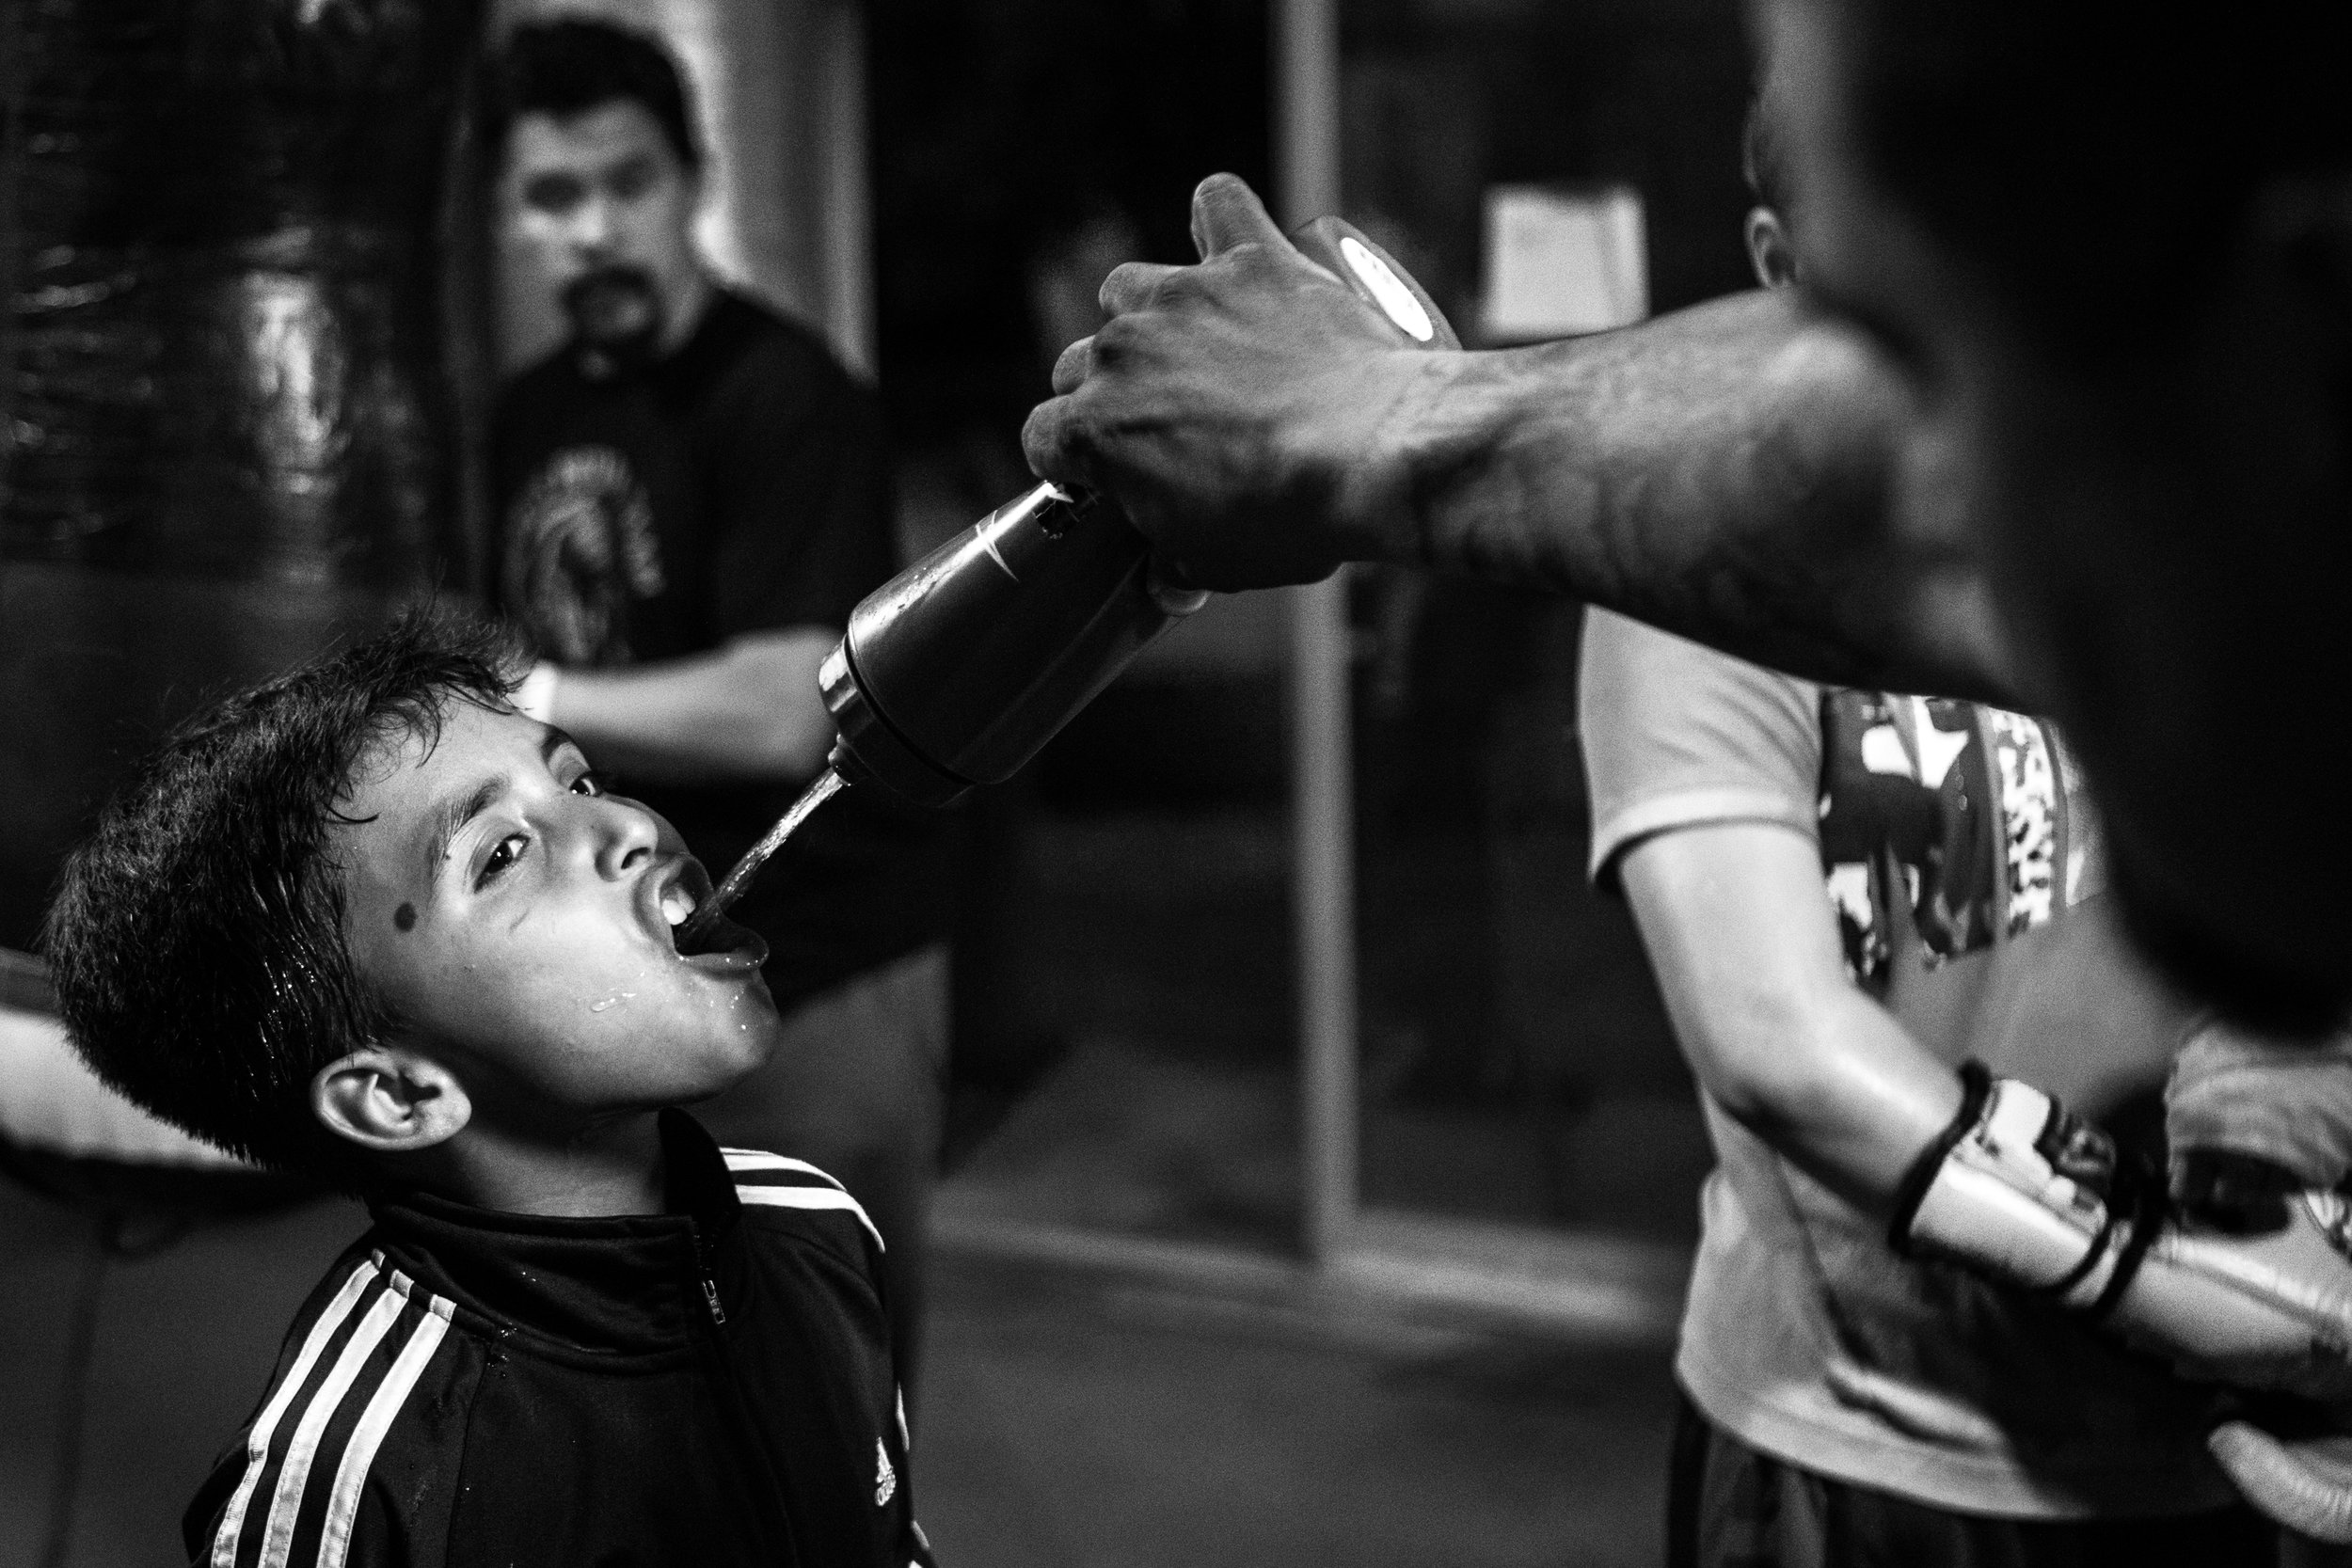  Miguel Ángel Jacobo Jr., 9, &nbsp;drinks water during a break between punching bag drills. Jacobo has only recently been registered as an amateur fighter though he has been boxing since age six. "I get pretty nervous when I'm in the ring," Jacobo sa